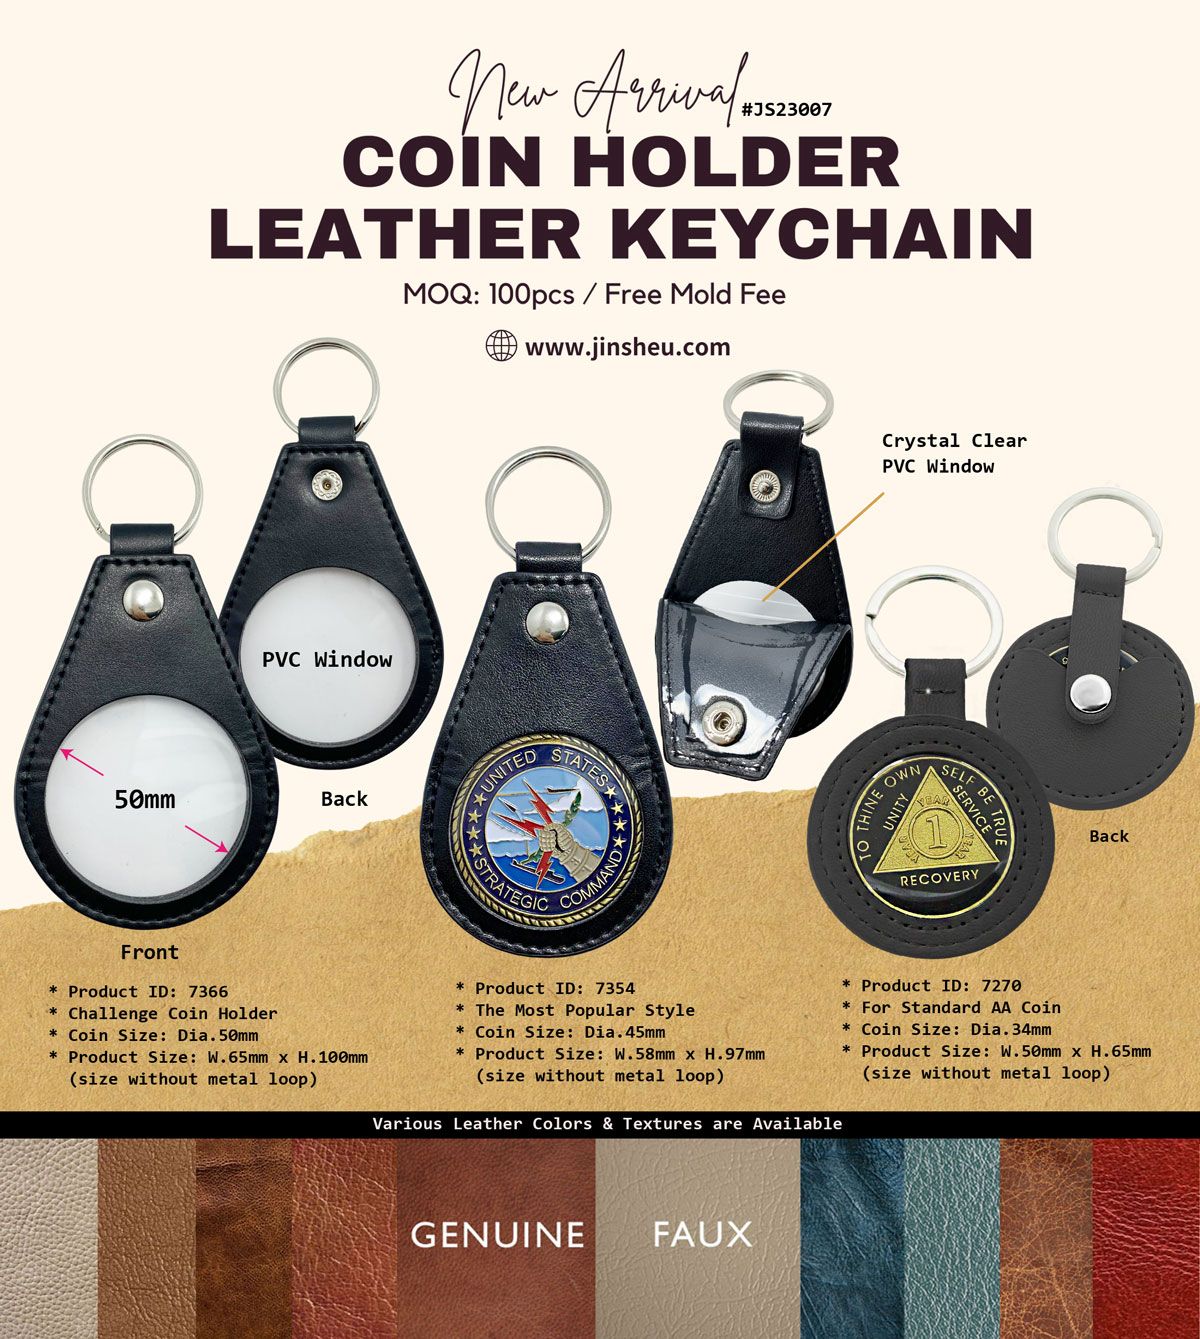 Wholesale Leather Coin Holder Keychains, Business Promotional Products and  Logo Items Manufacturer